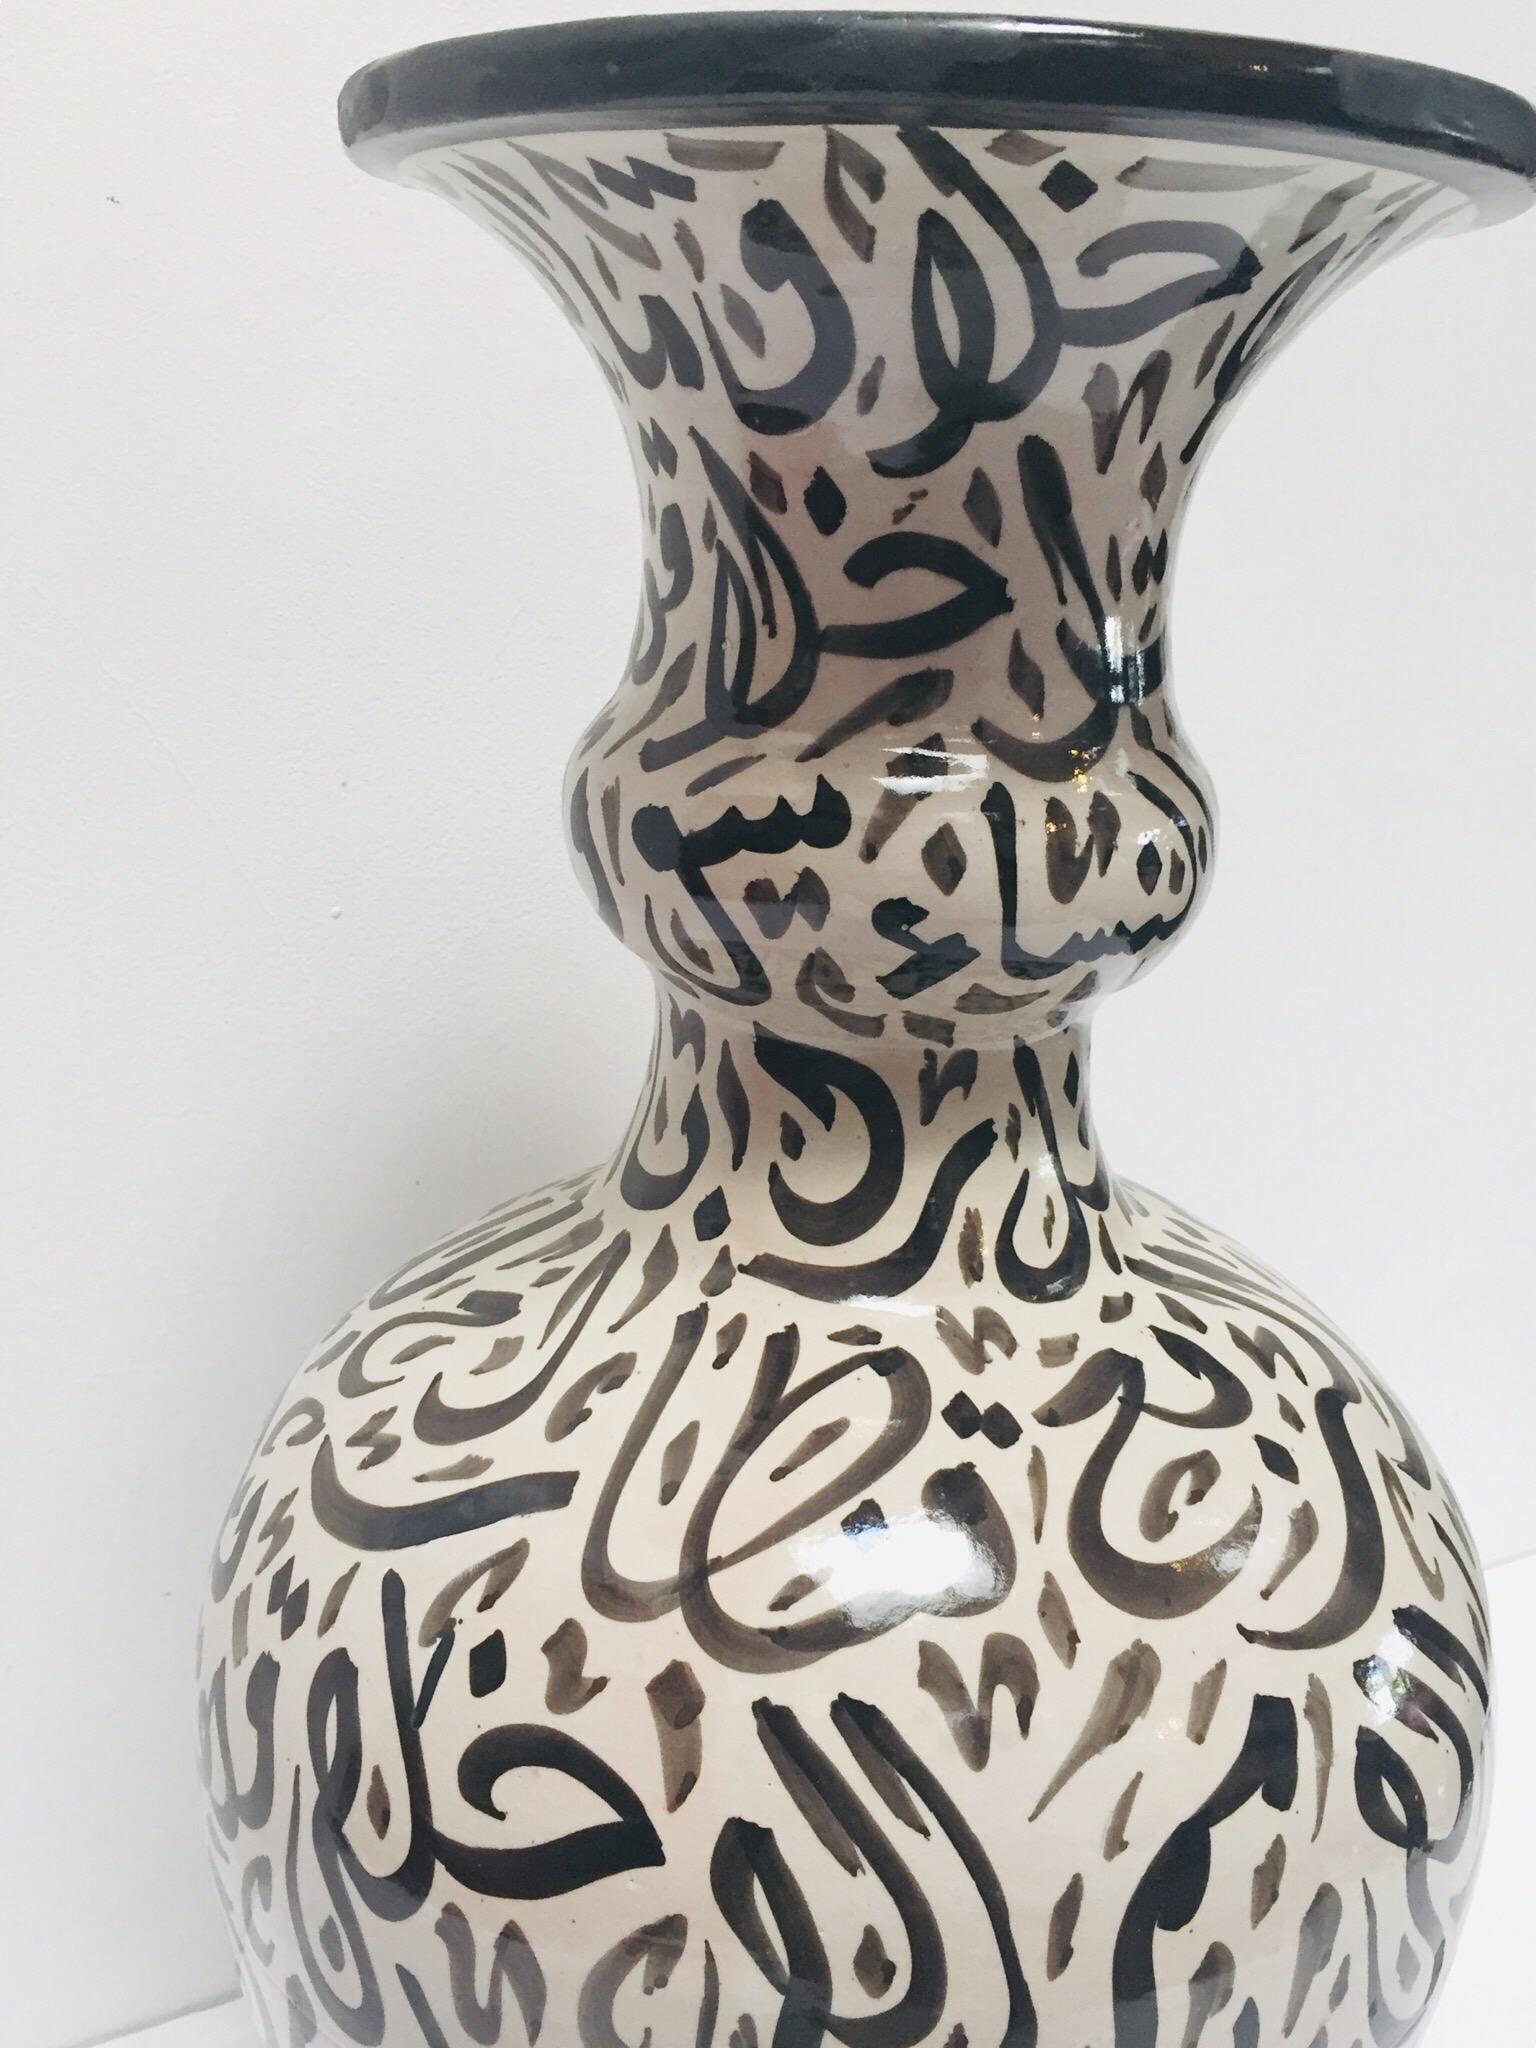 Large Moroccan Glazed Ceramic Vase with Arabic Calligraphy Brown Writing, Fez 3